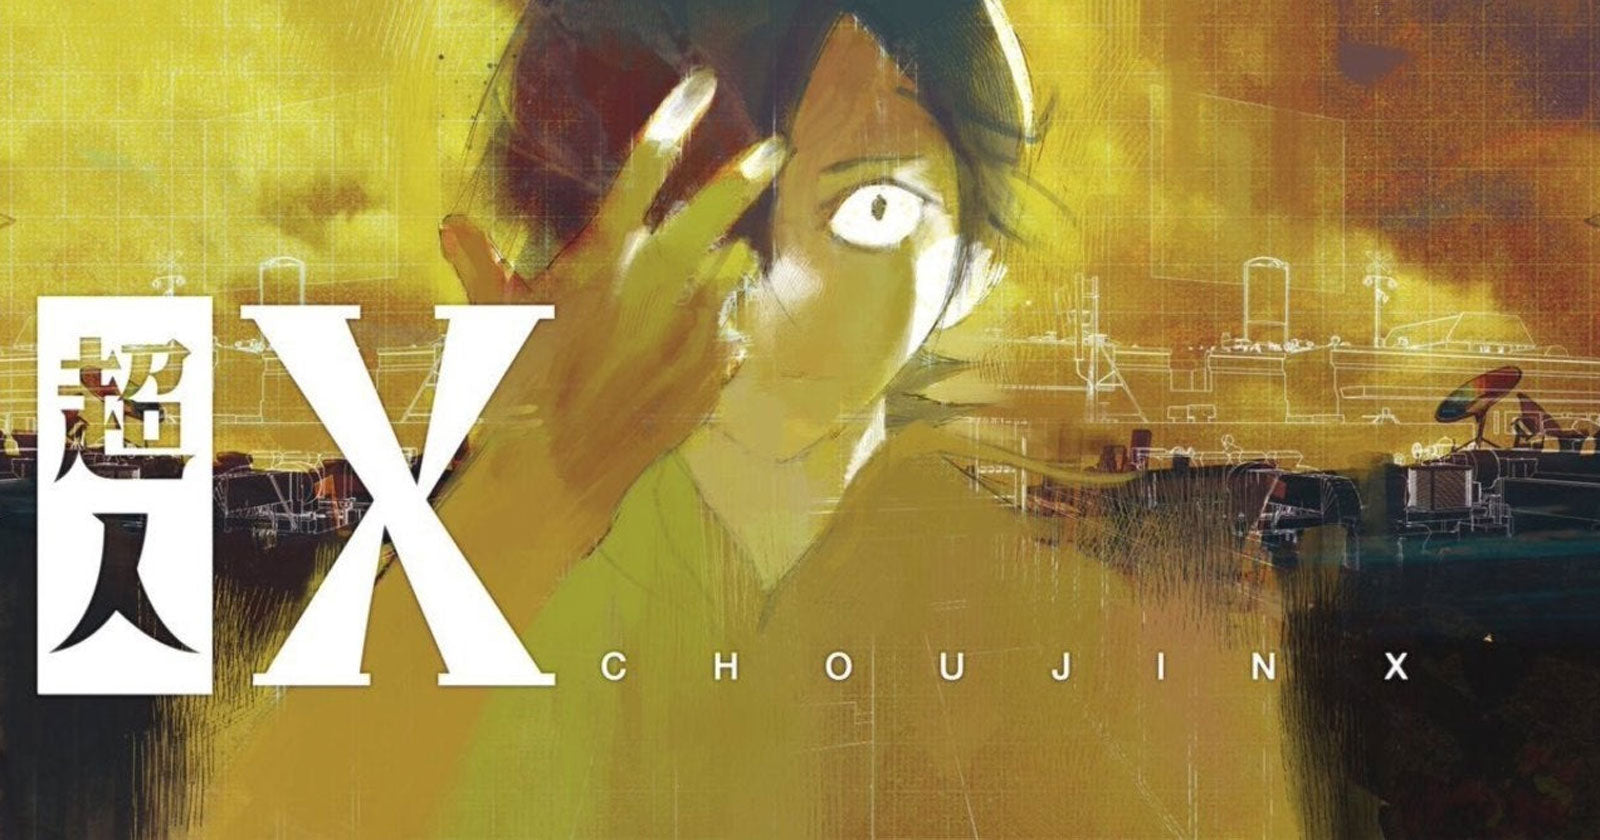 A brand new manga from the creator of Tokyo Ghoul is here!